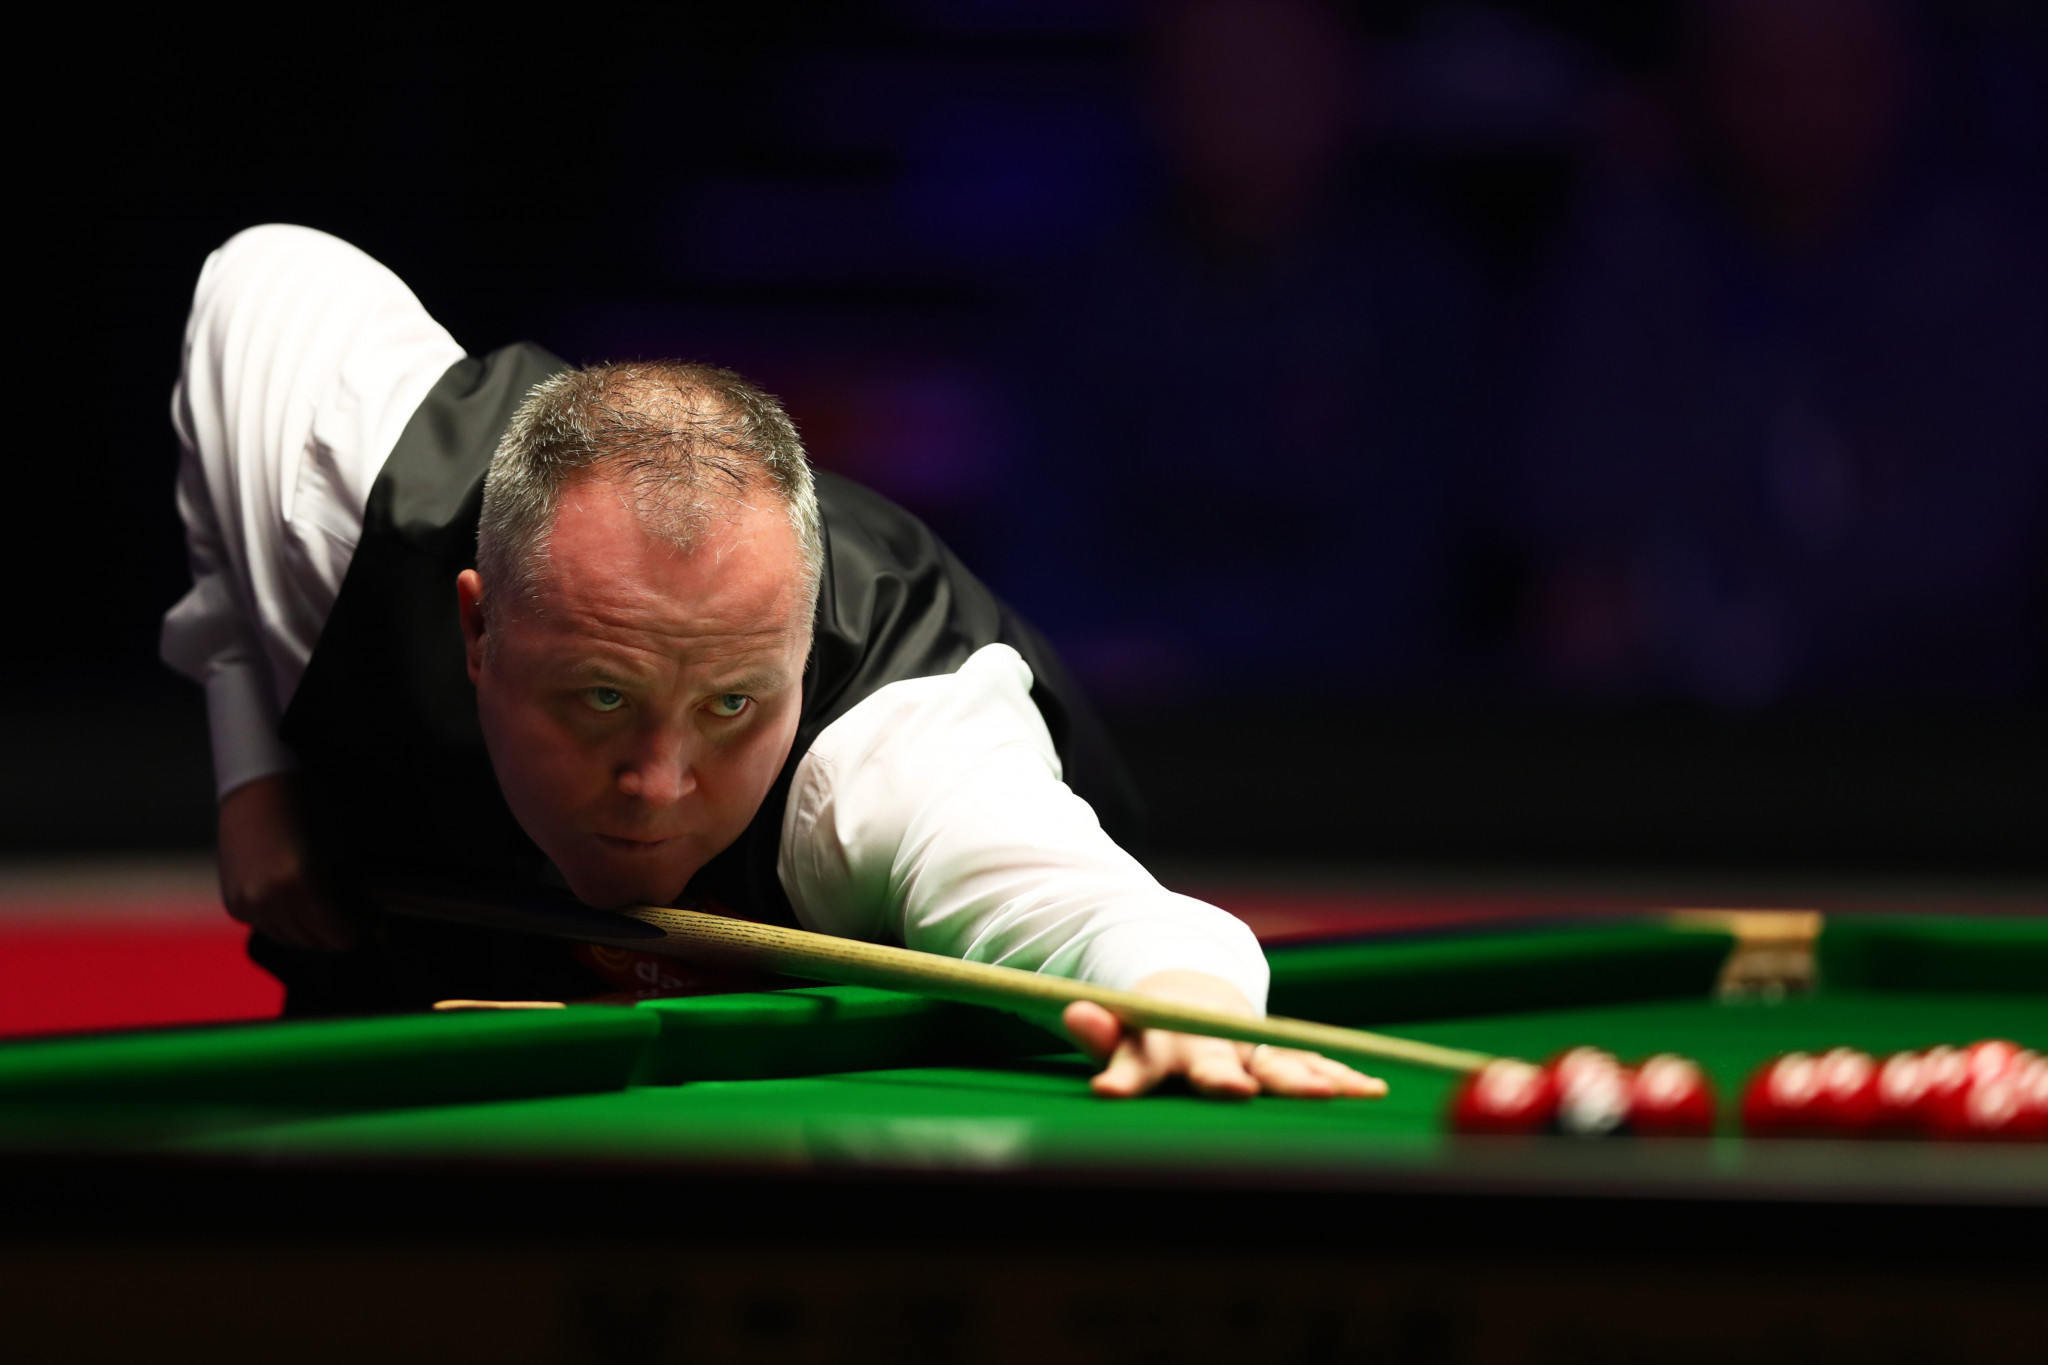 Four-time winner John Higgins is 5-3 behind against David Gilbert after the first session of their World Snooker Championship semi-final in Sheffield ©Getty Images